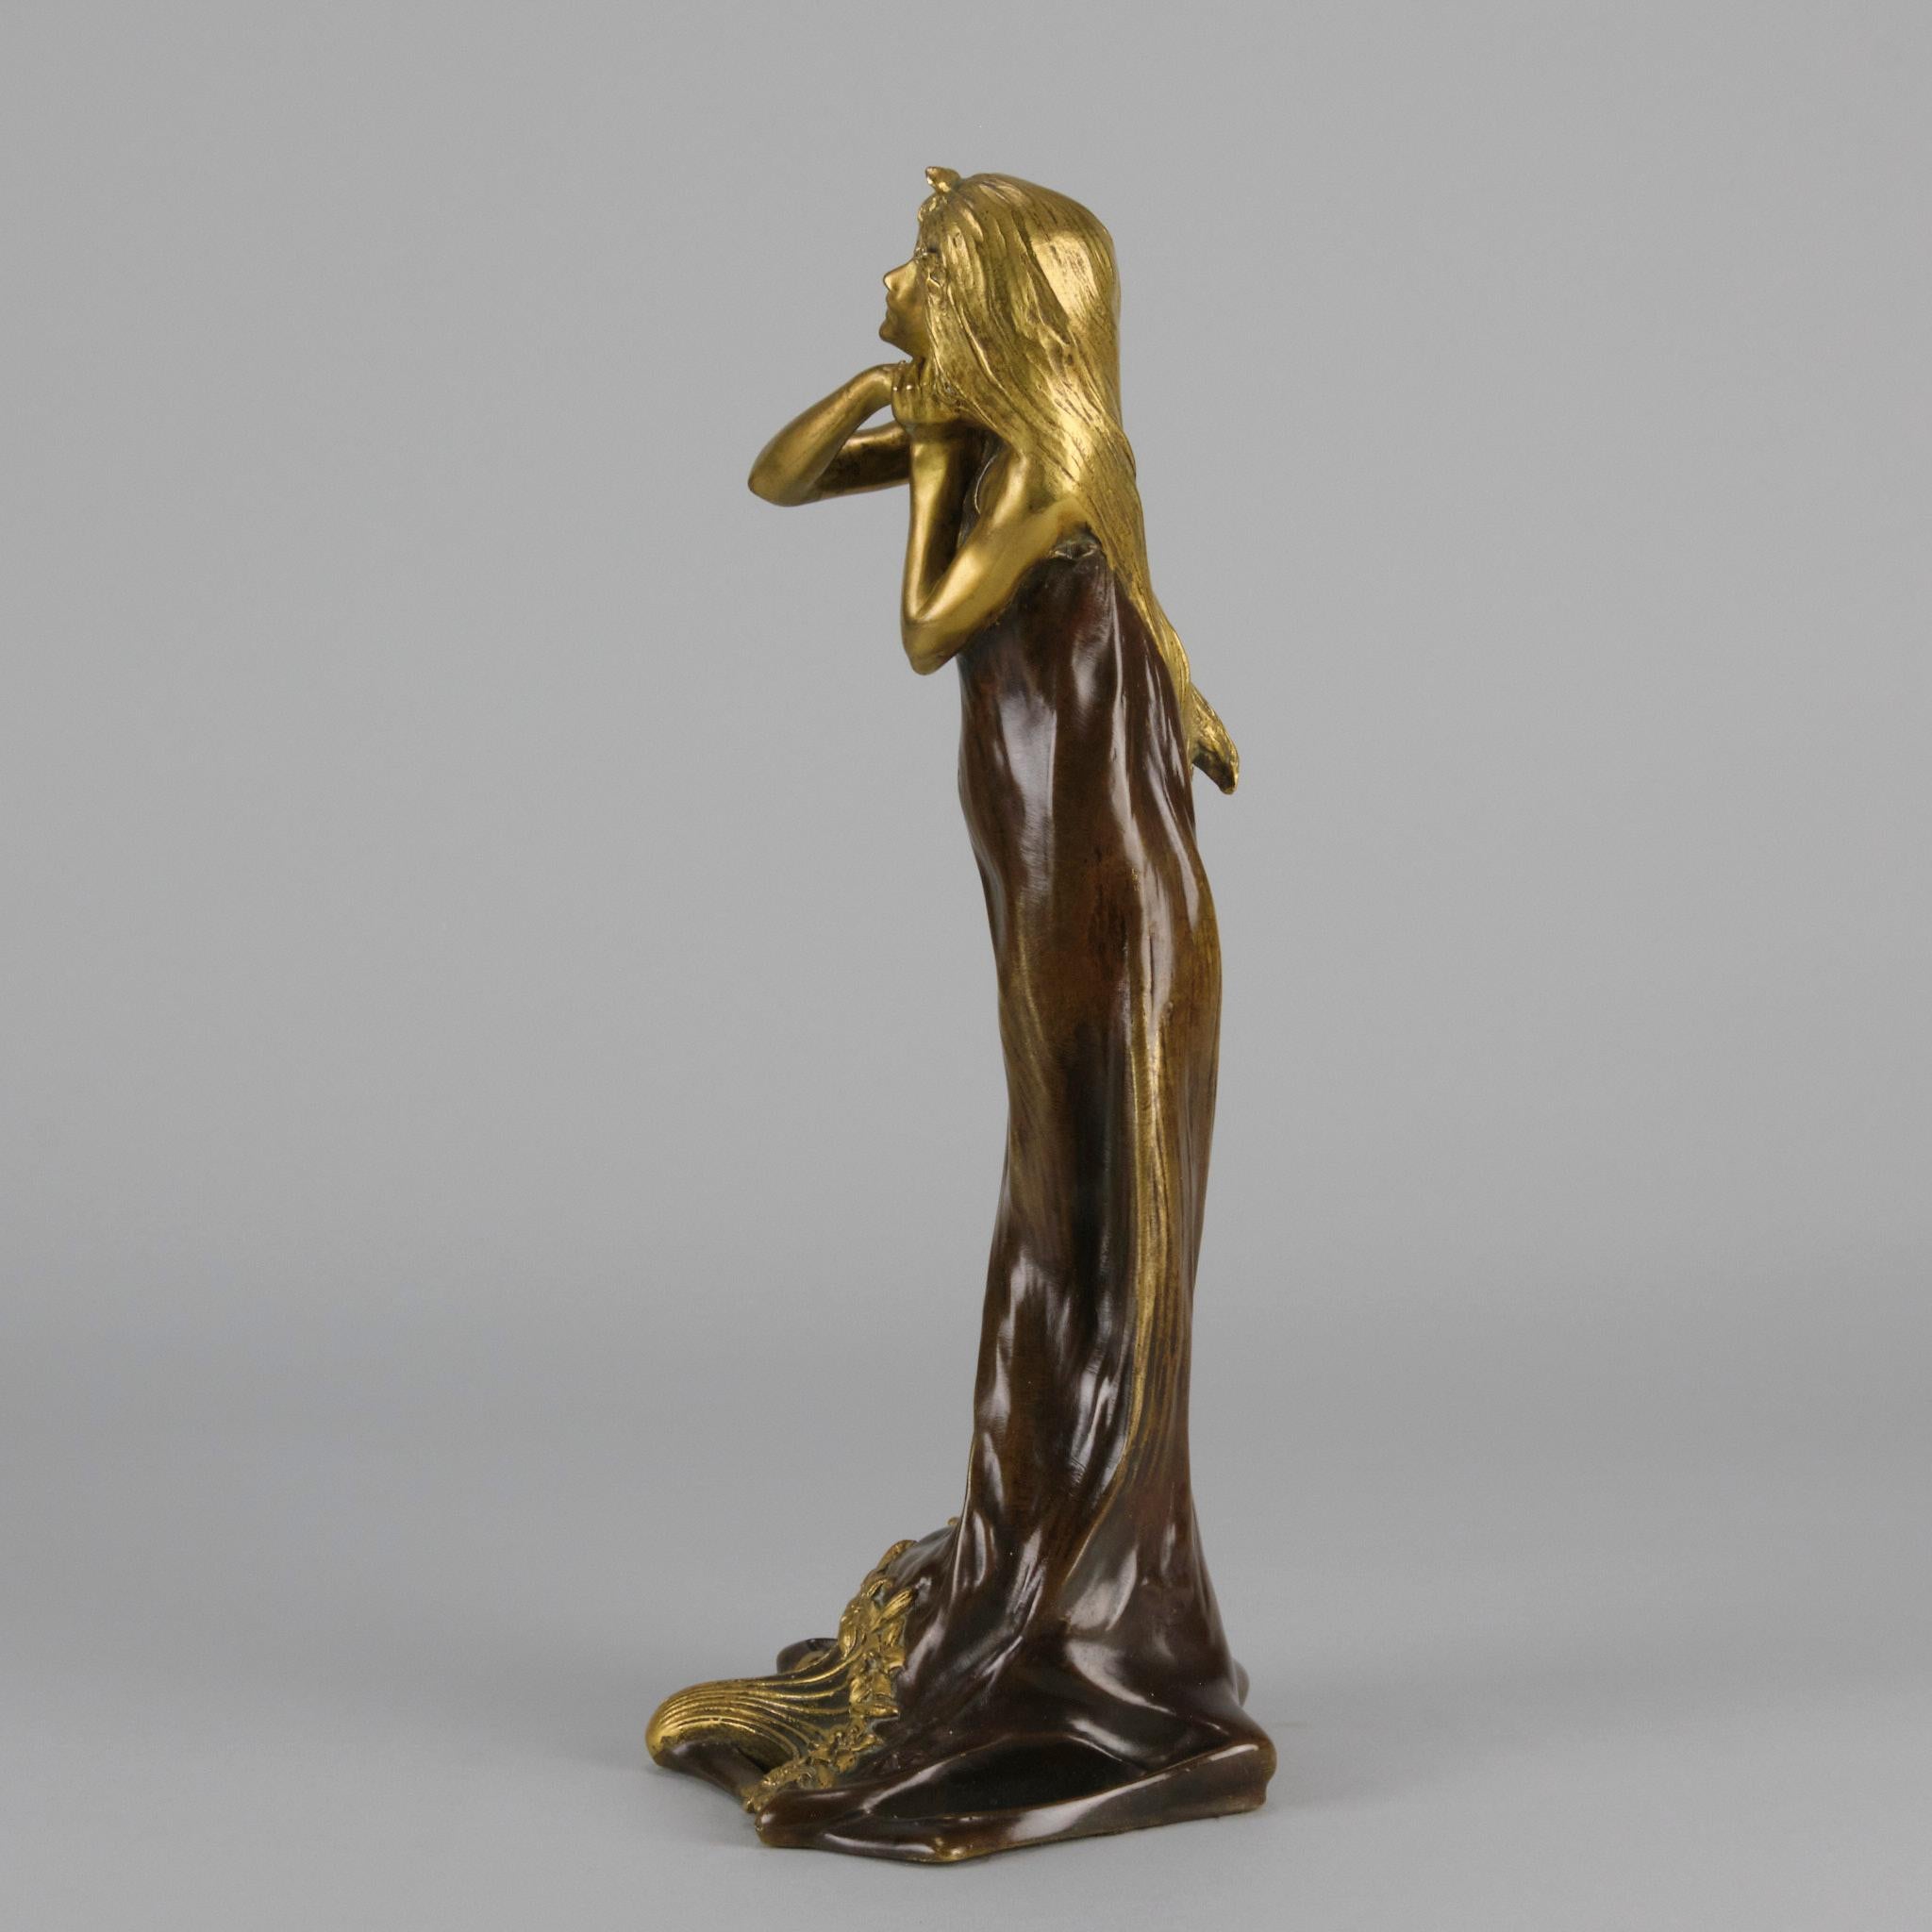 Early 20th Century Bronze Entitled “Jeune Femme” by C Peyre 1